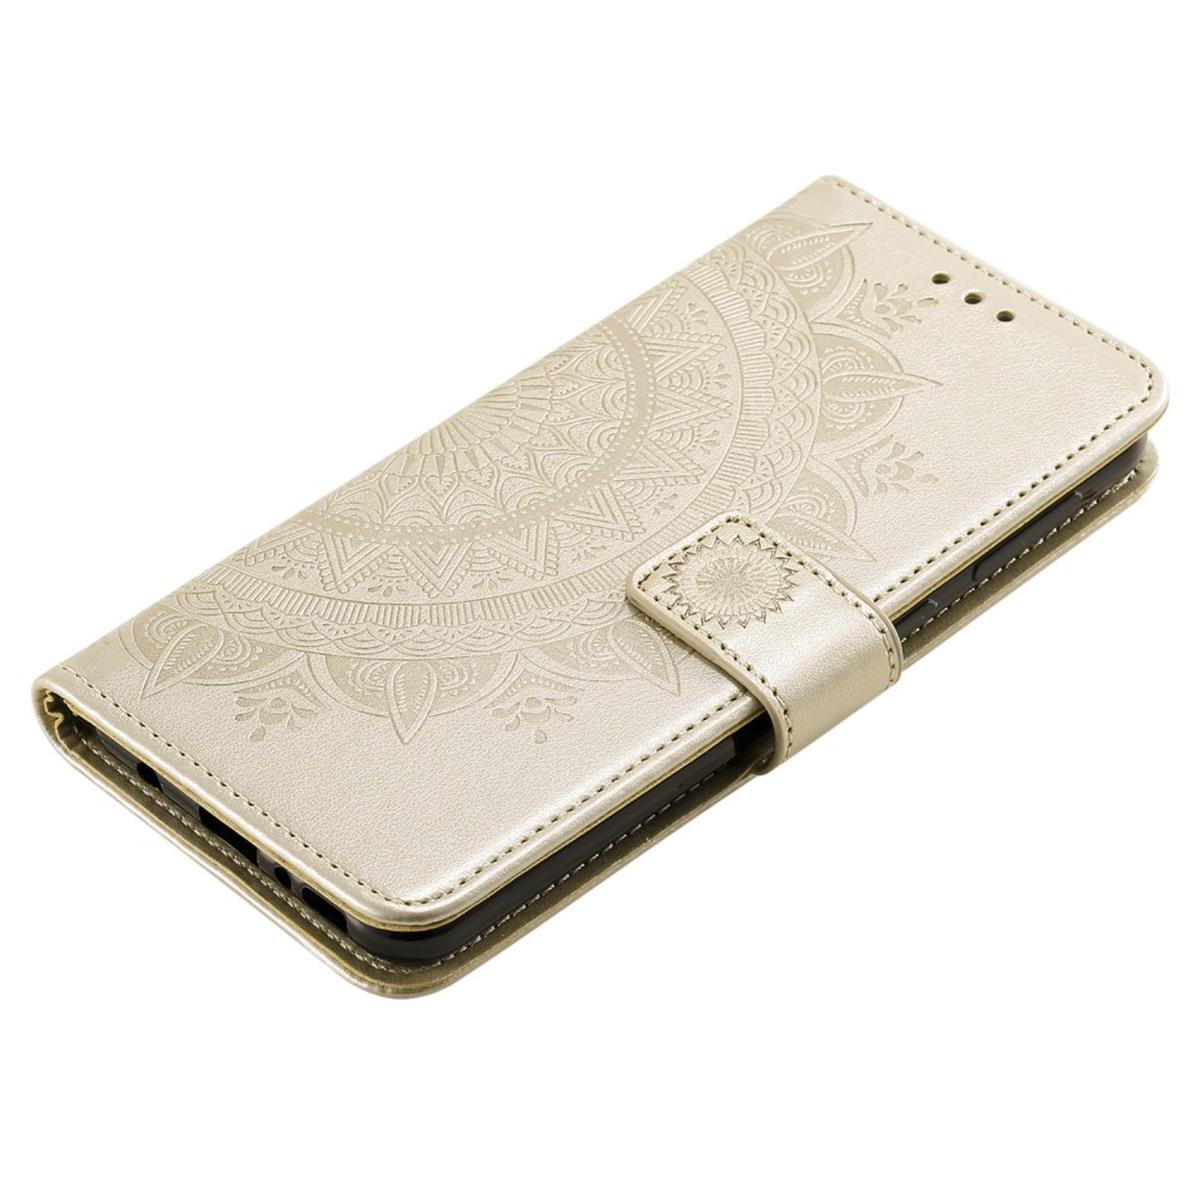 mit Huawei, Mandala Smart Klapphülle P 2020, Muster, COVERKINGZ Gold Bookcover,